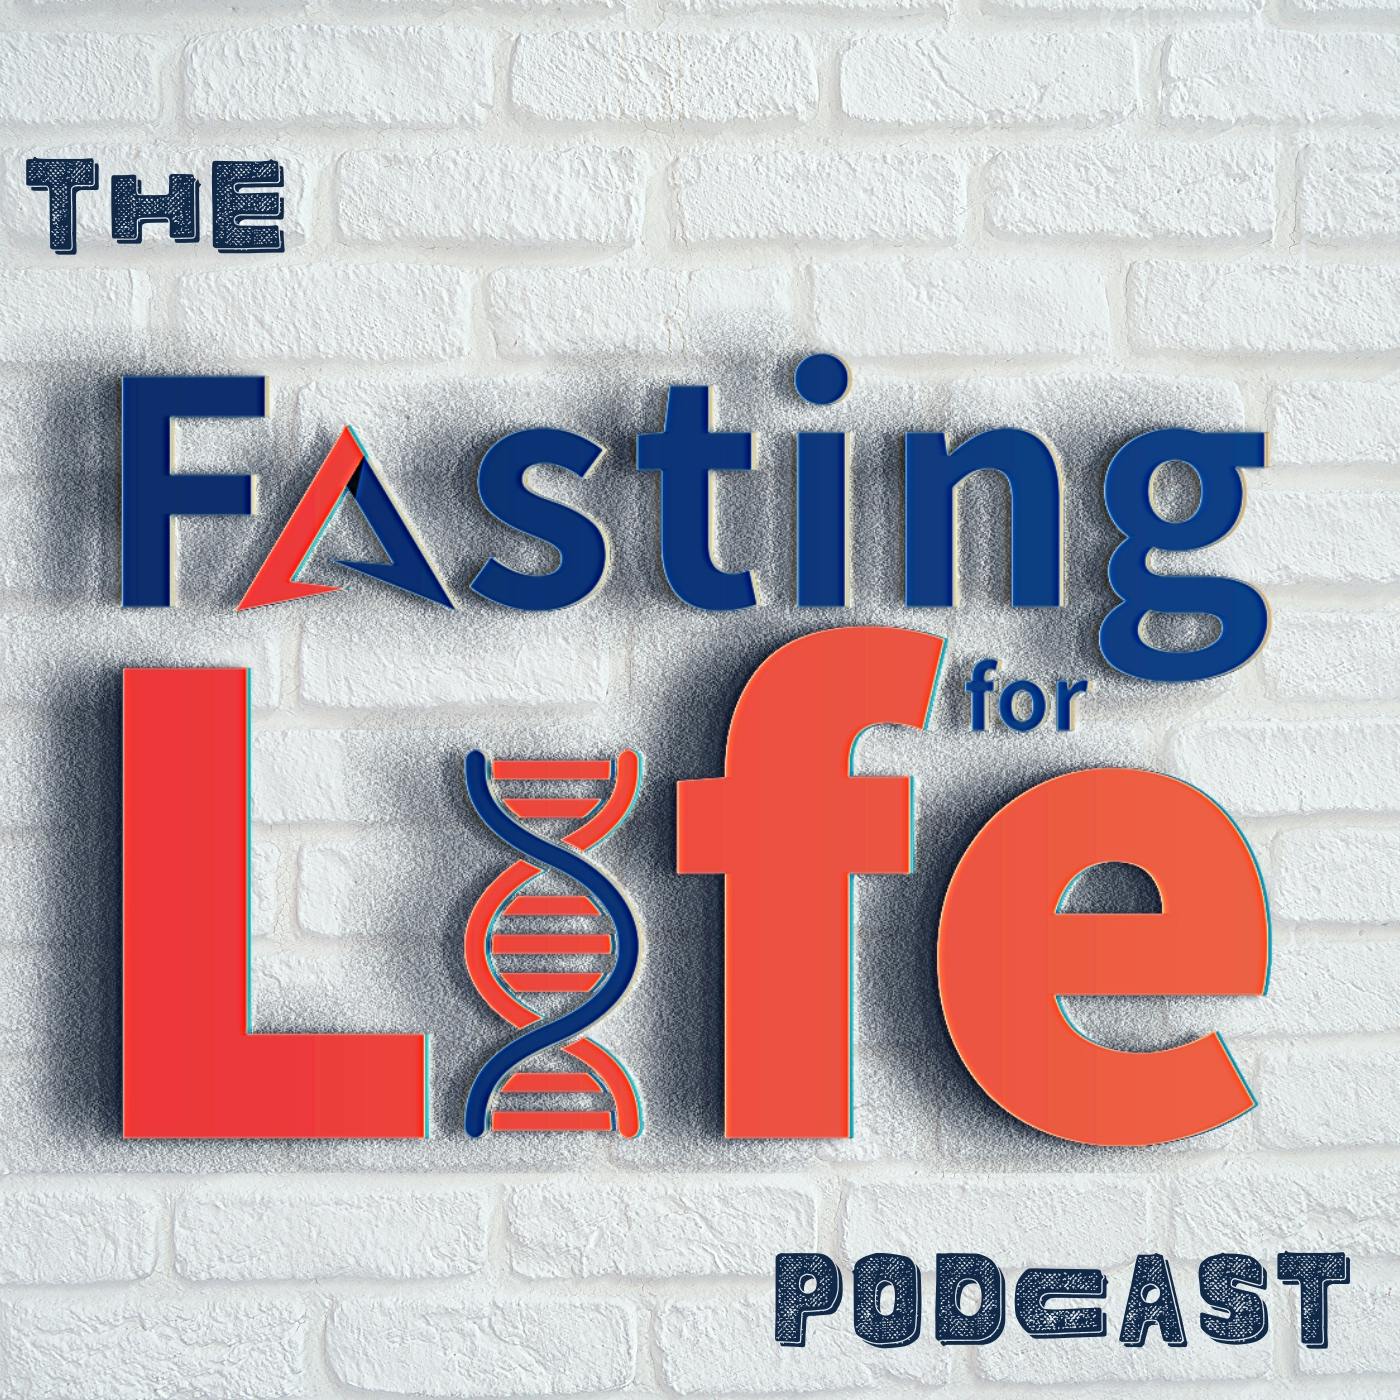 Ep. 94 - Staggering costs of being overweight | Magic at 72 hours | Choosing between buying food or medicine | What blood tests should I ask for? | Bariatric Surgery vs. Fasting | Free Intermittent Fa